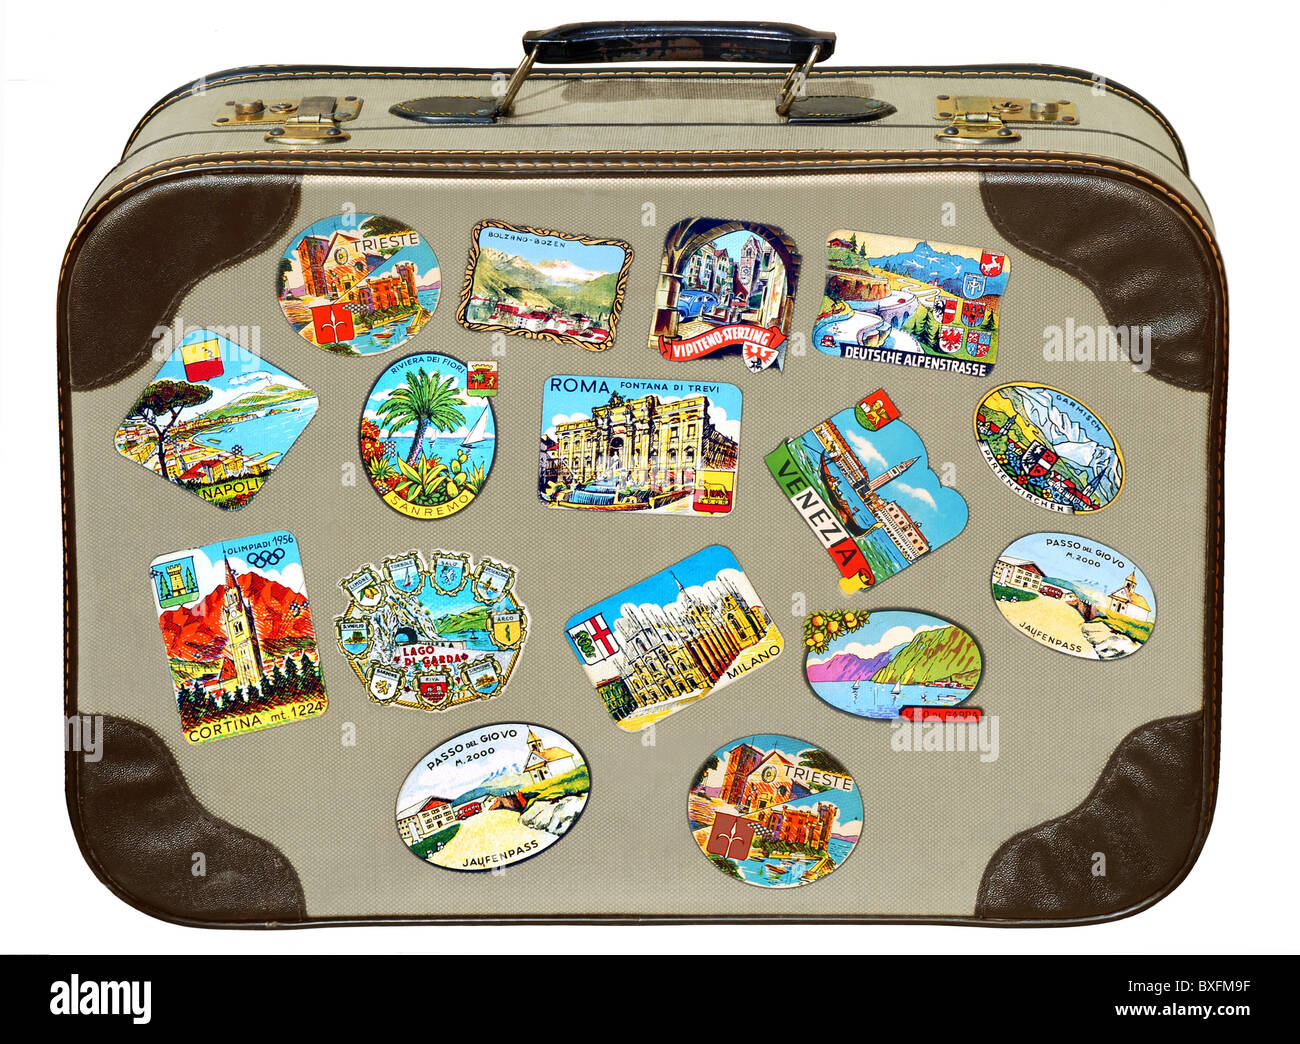 tourism, baggage, case with sticker, Germany, circa 1958, Additional-Rights-Clearences-Not Available Stock Photo